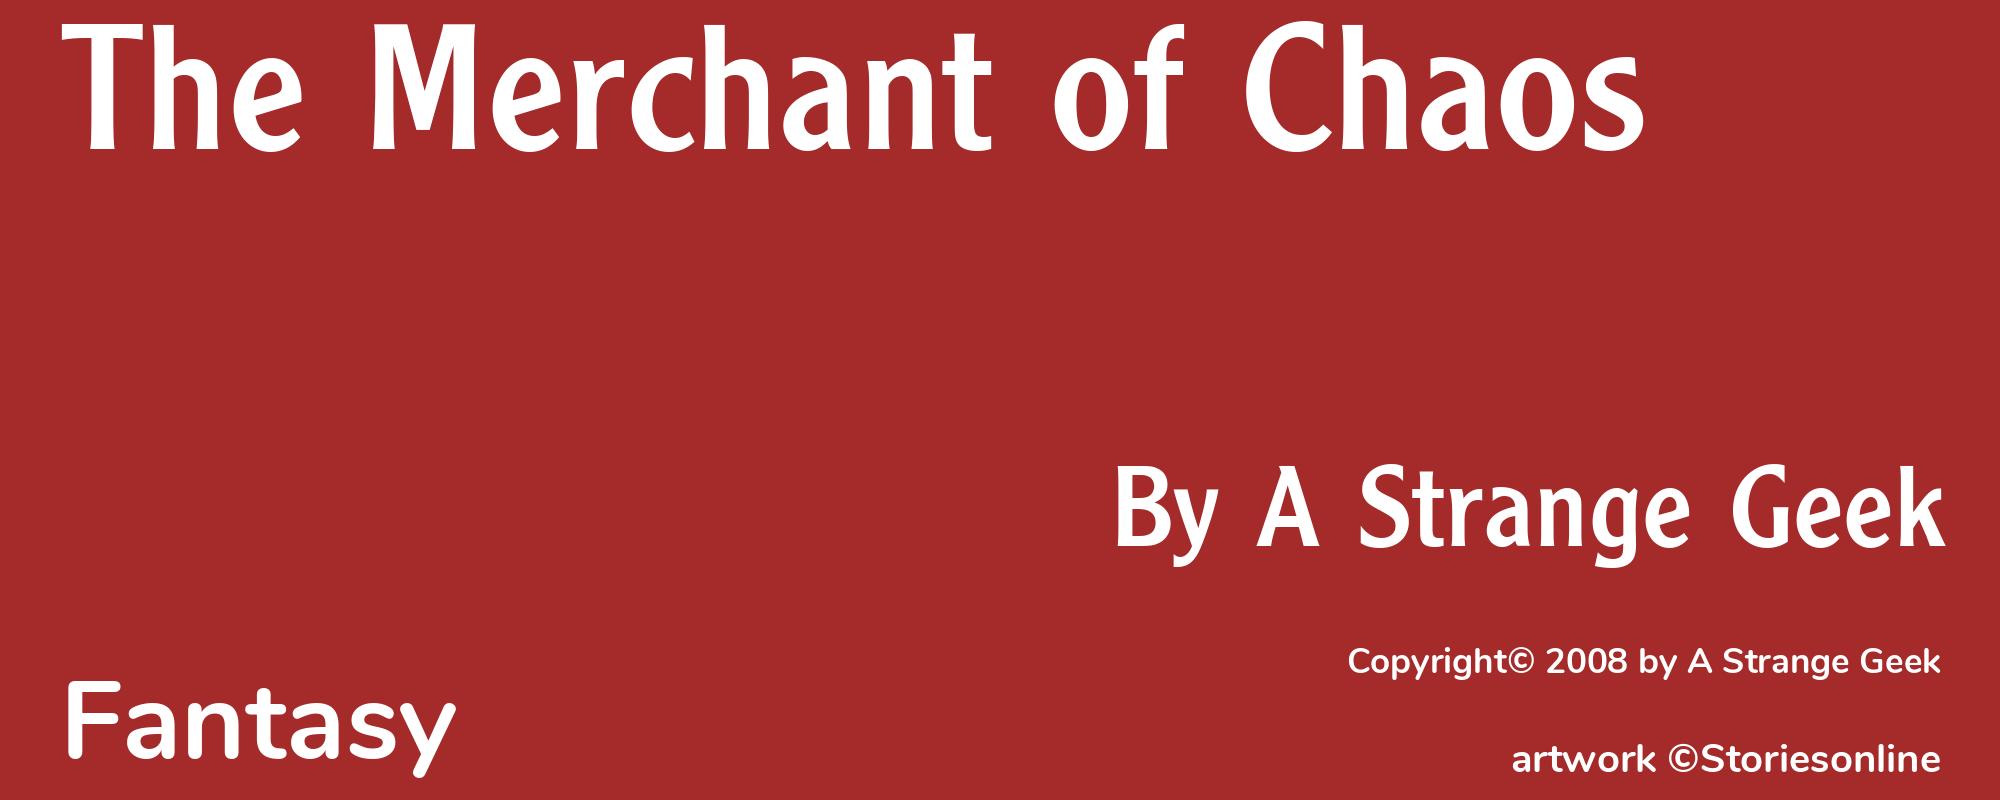 The Merchant of Chaos - Cover